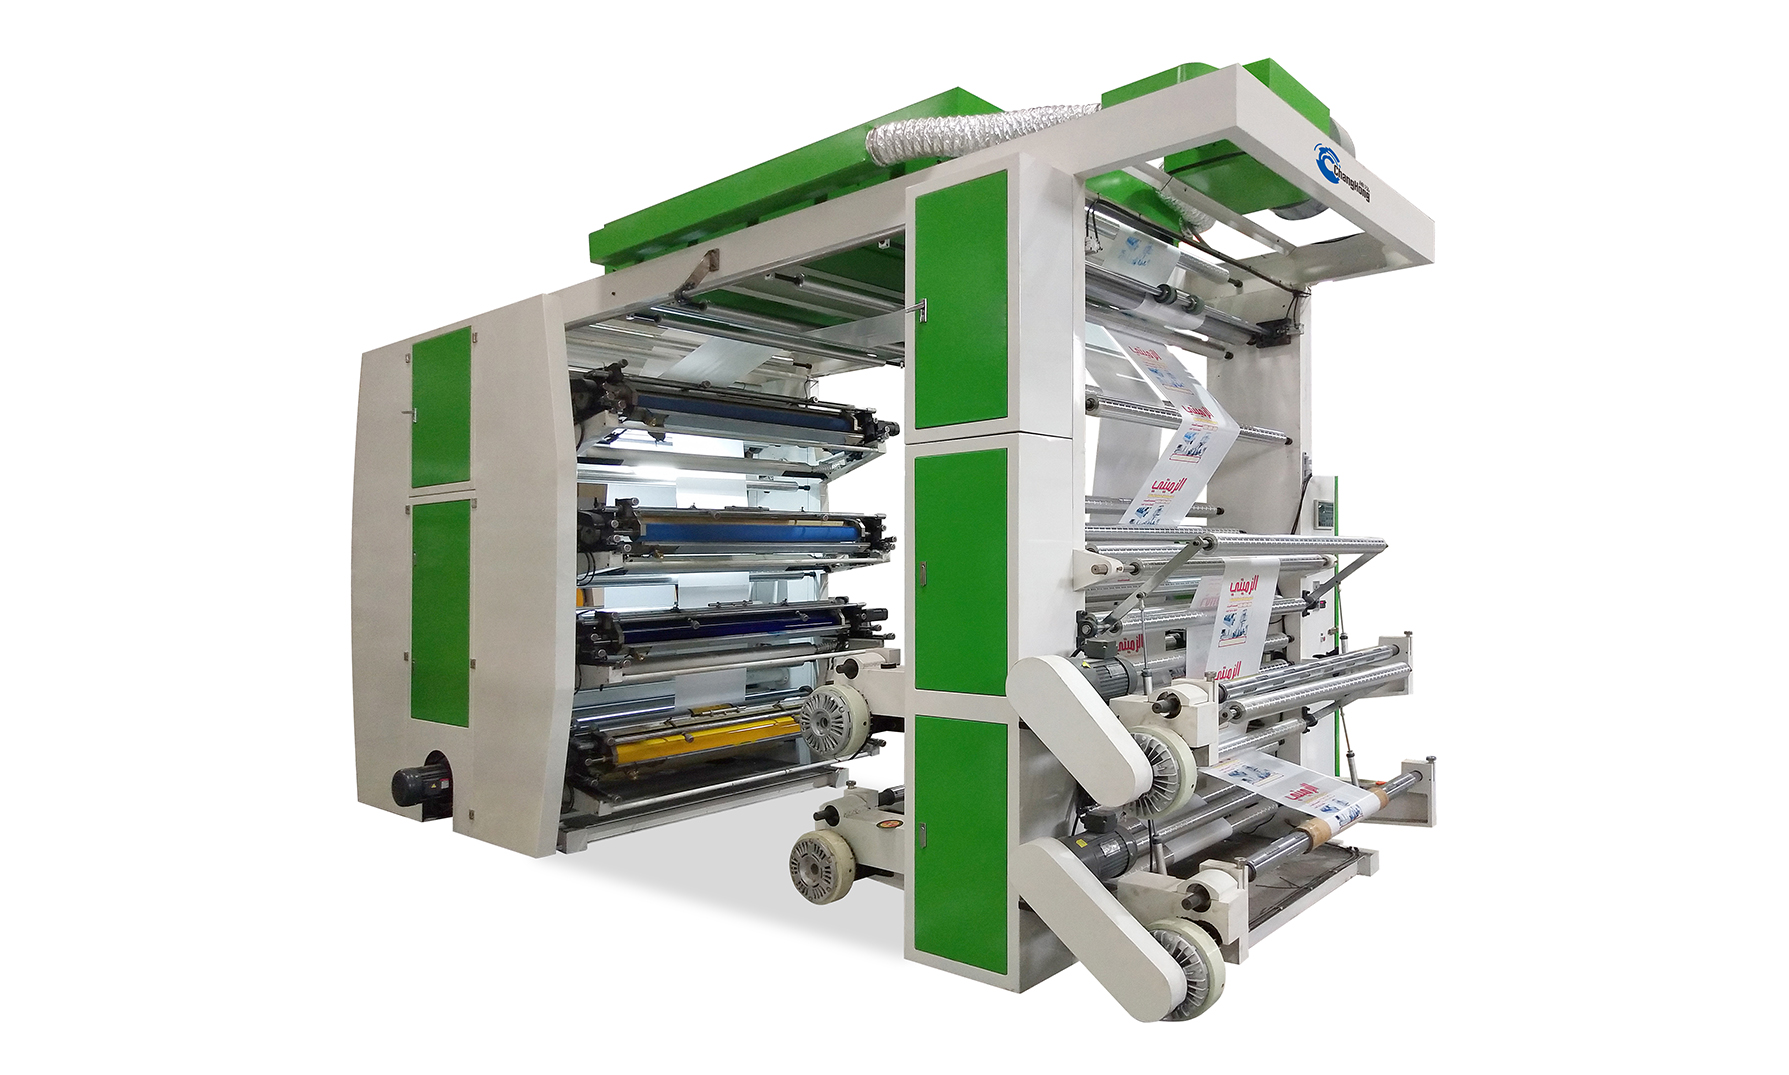 New Arrival China Single Side / Double Side Flexo Printing Machine/High Speed Flexographic Printing Machine